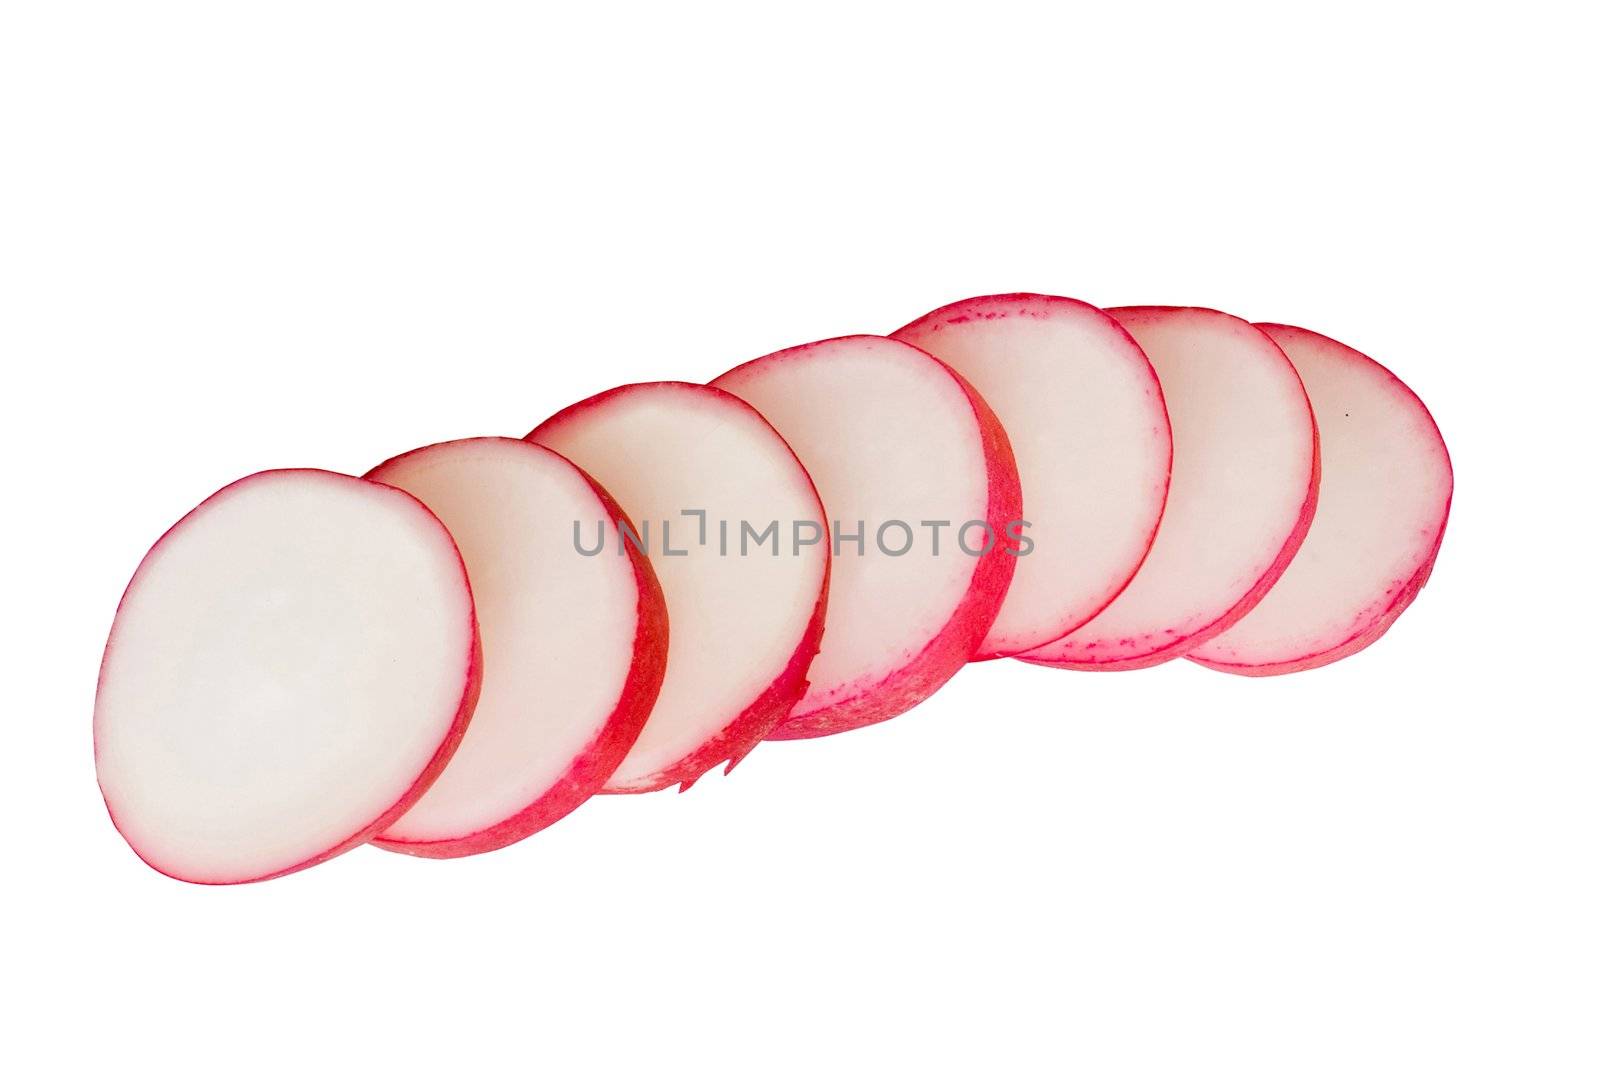 An image of slices of garden radish